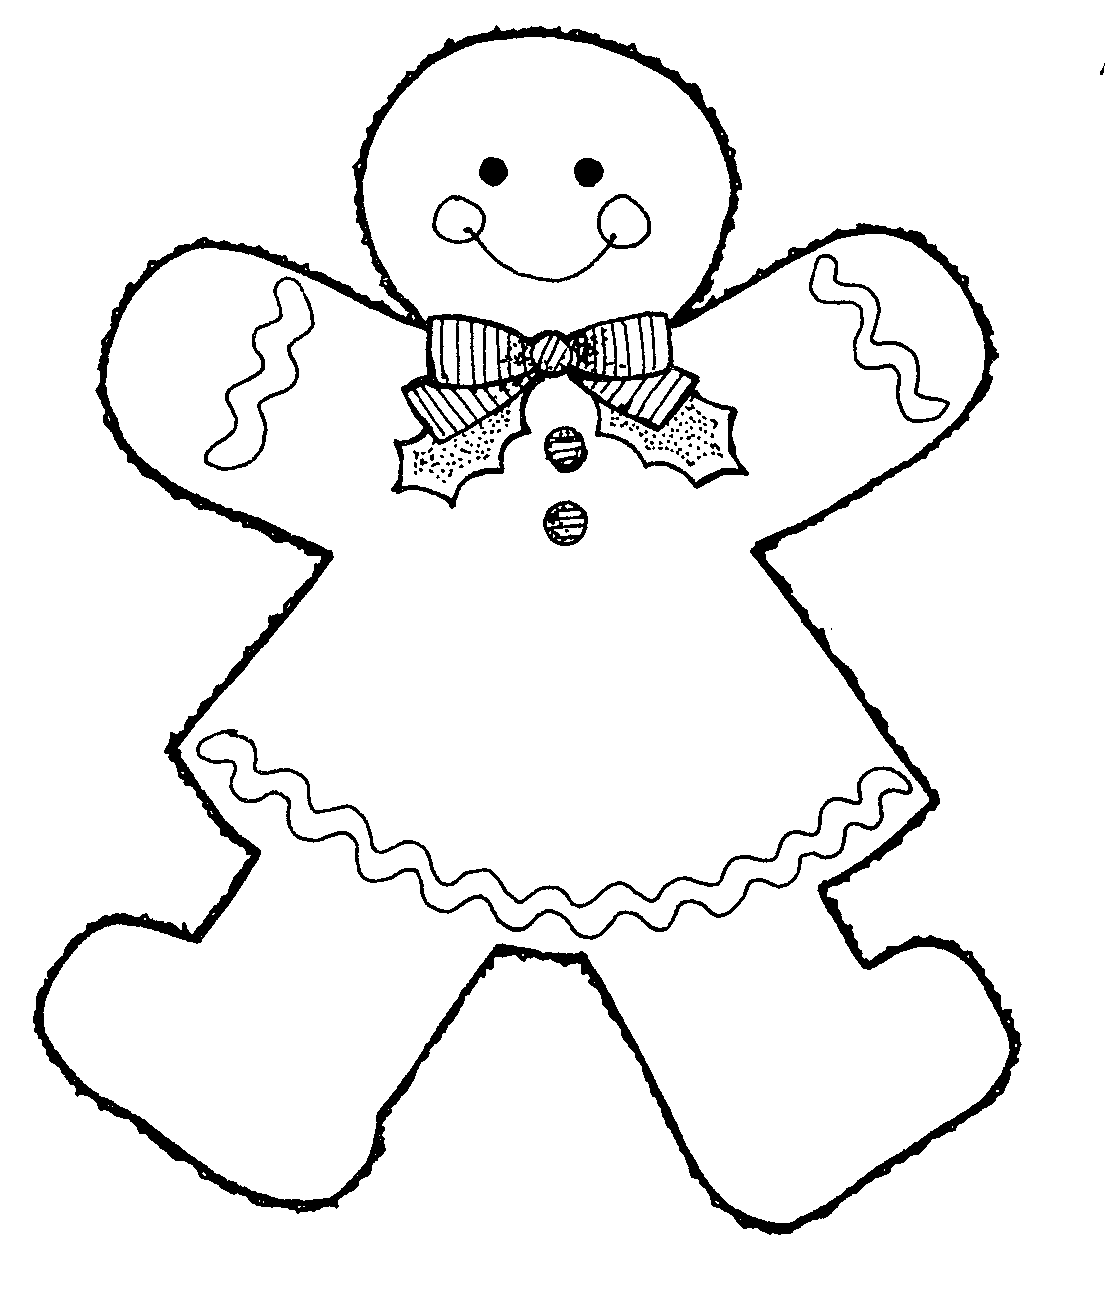 Gingerbread House Outline images